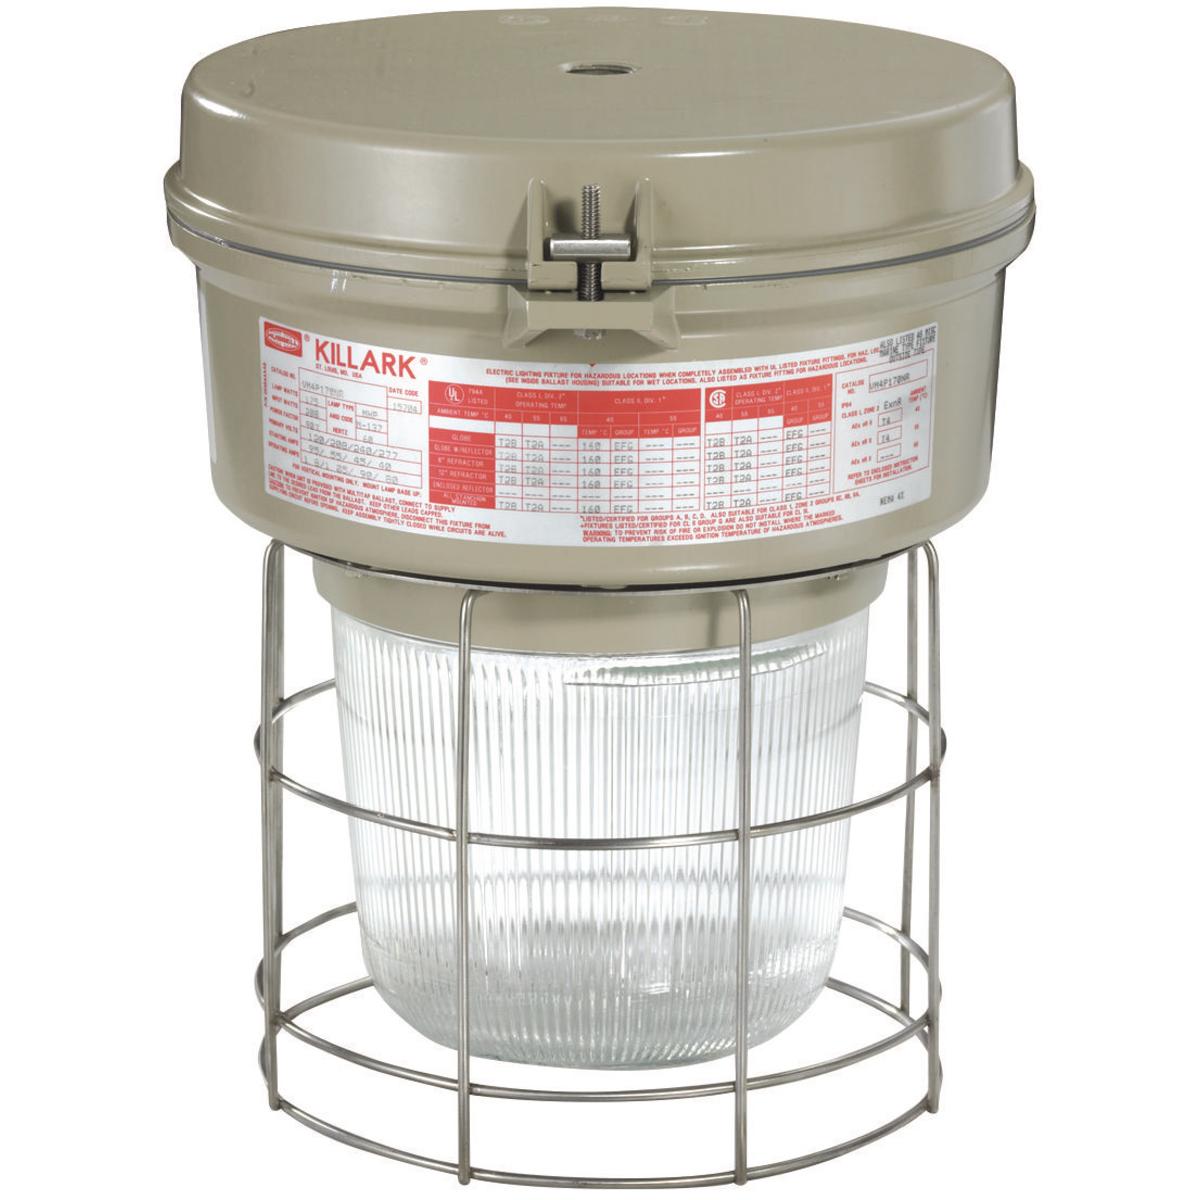 Hubbell VM4H100A2GLG VM4 Series - 100W Metal Halide Quadri-Volt - 3/4" Pendant - Globe and Guard  ; Ballast tank and splice box – corrosion resistant copper-free aluminum alloy with baked powder epoxy/polyester finish, electrostatically applied for complete, uniform corrosion